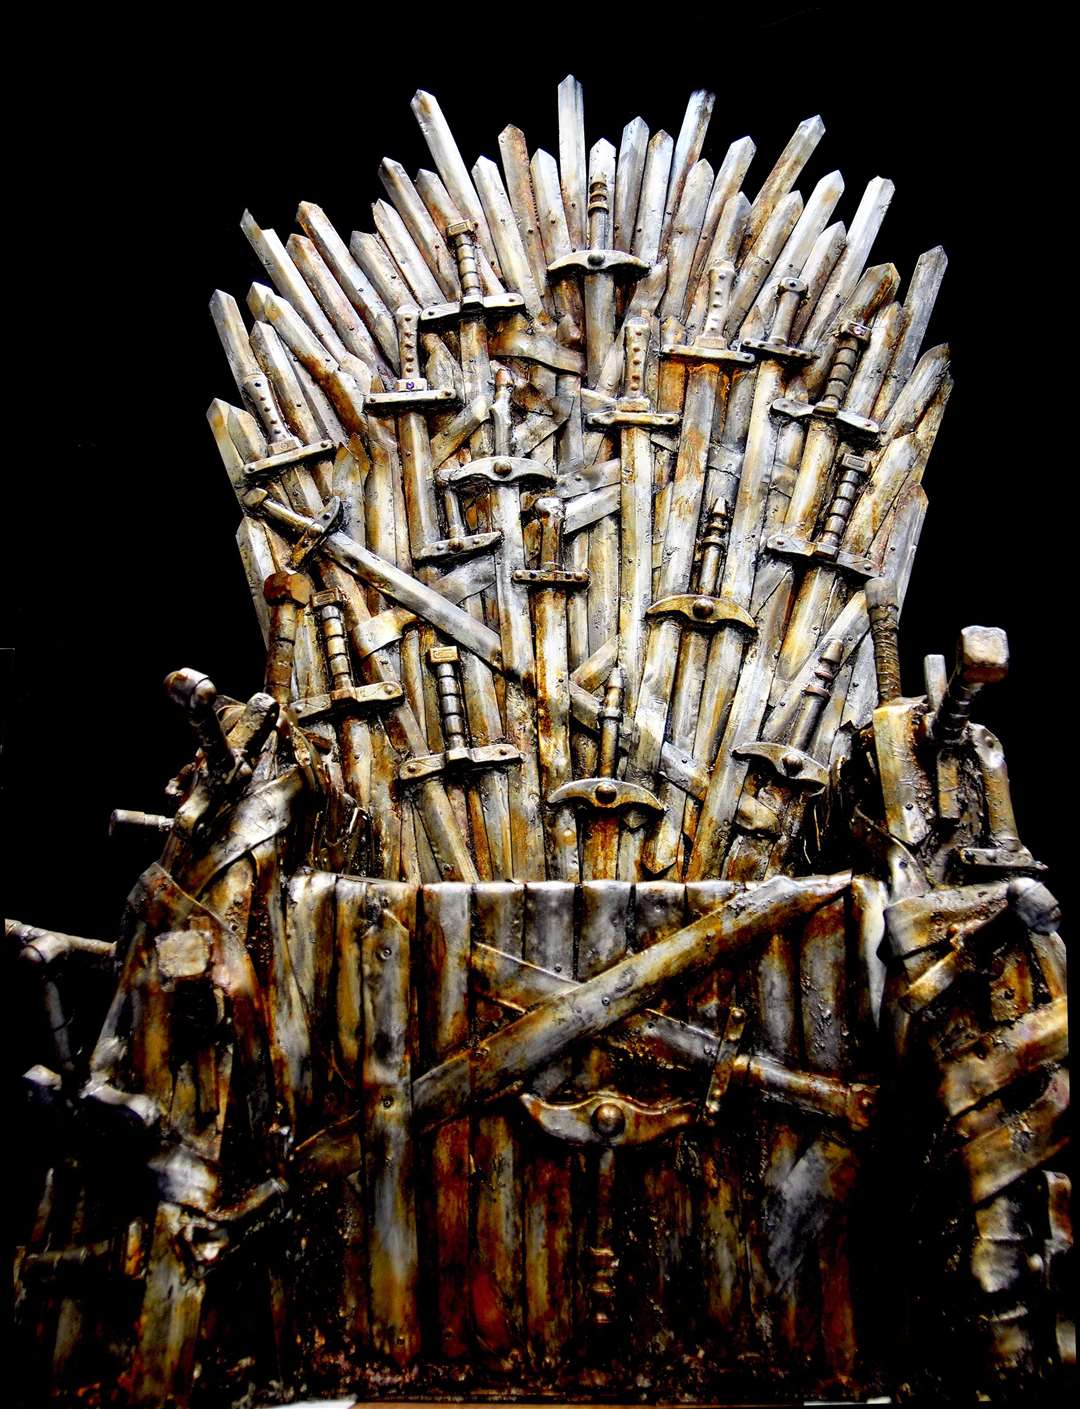 The Iron Throne from Game of Thrones